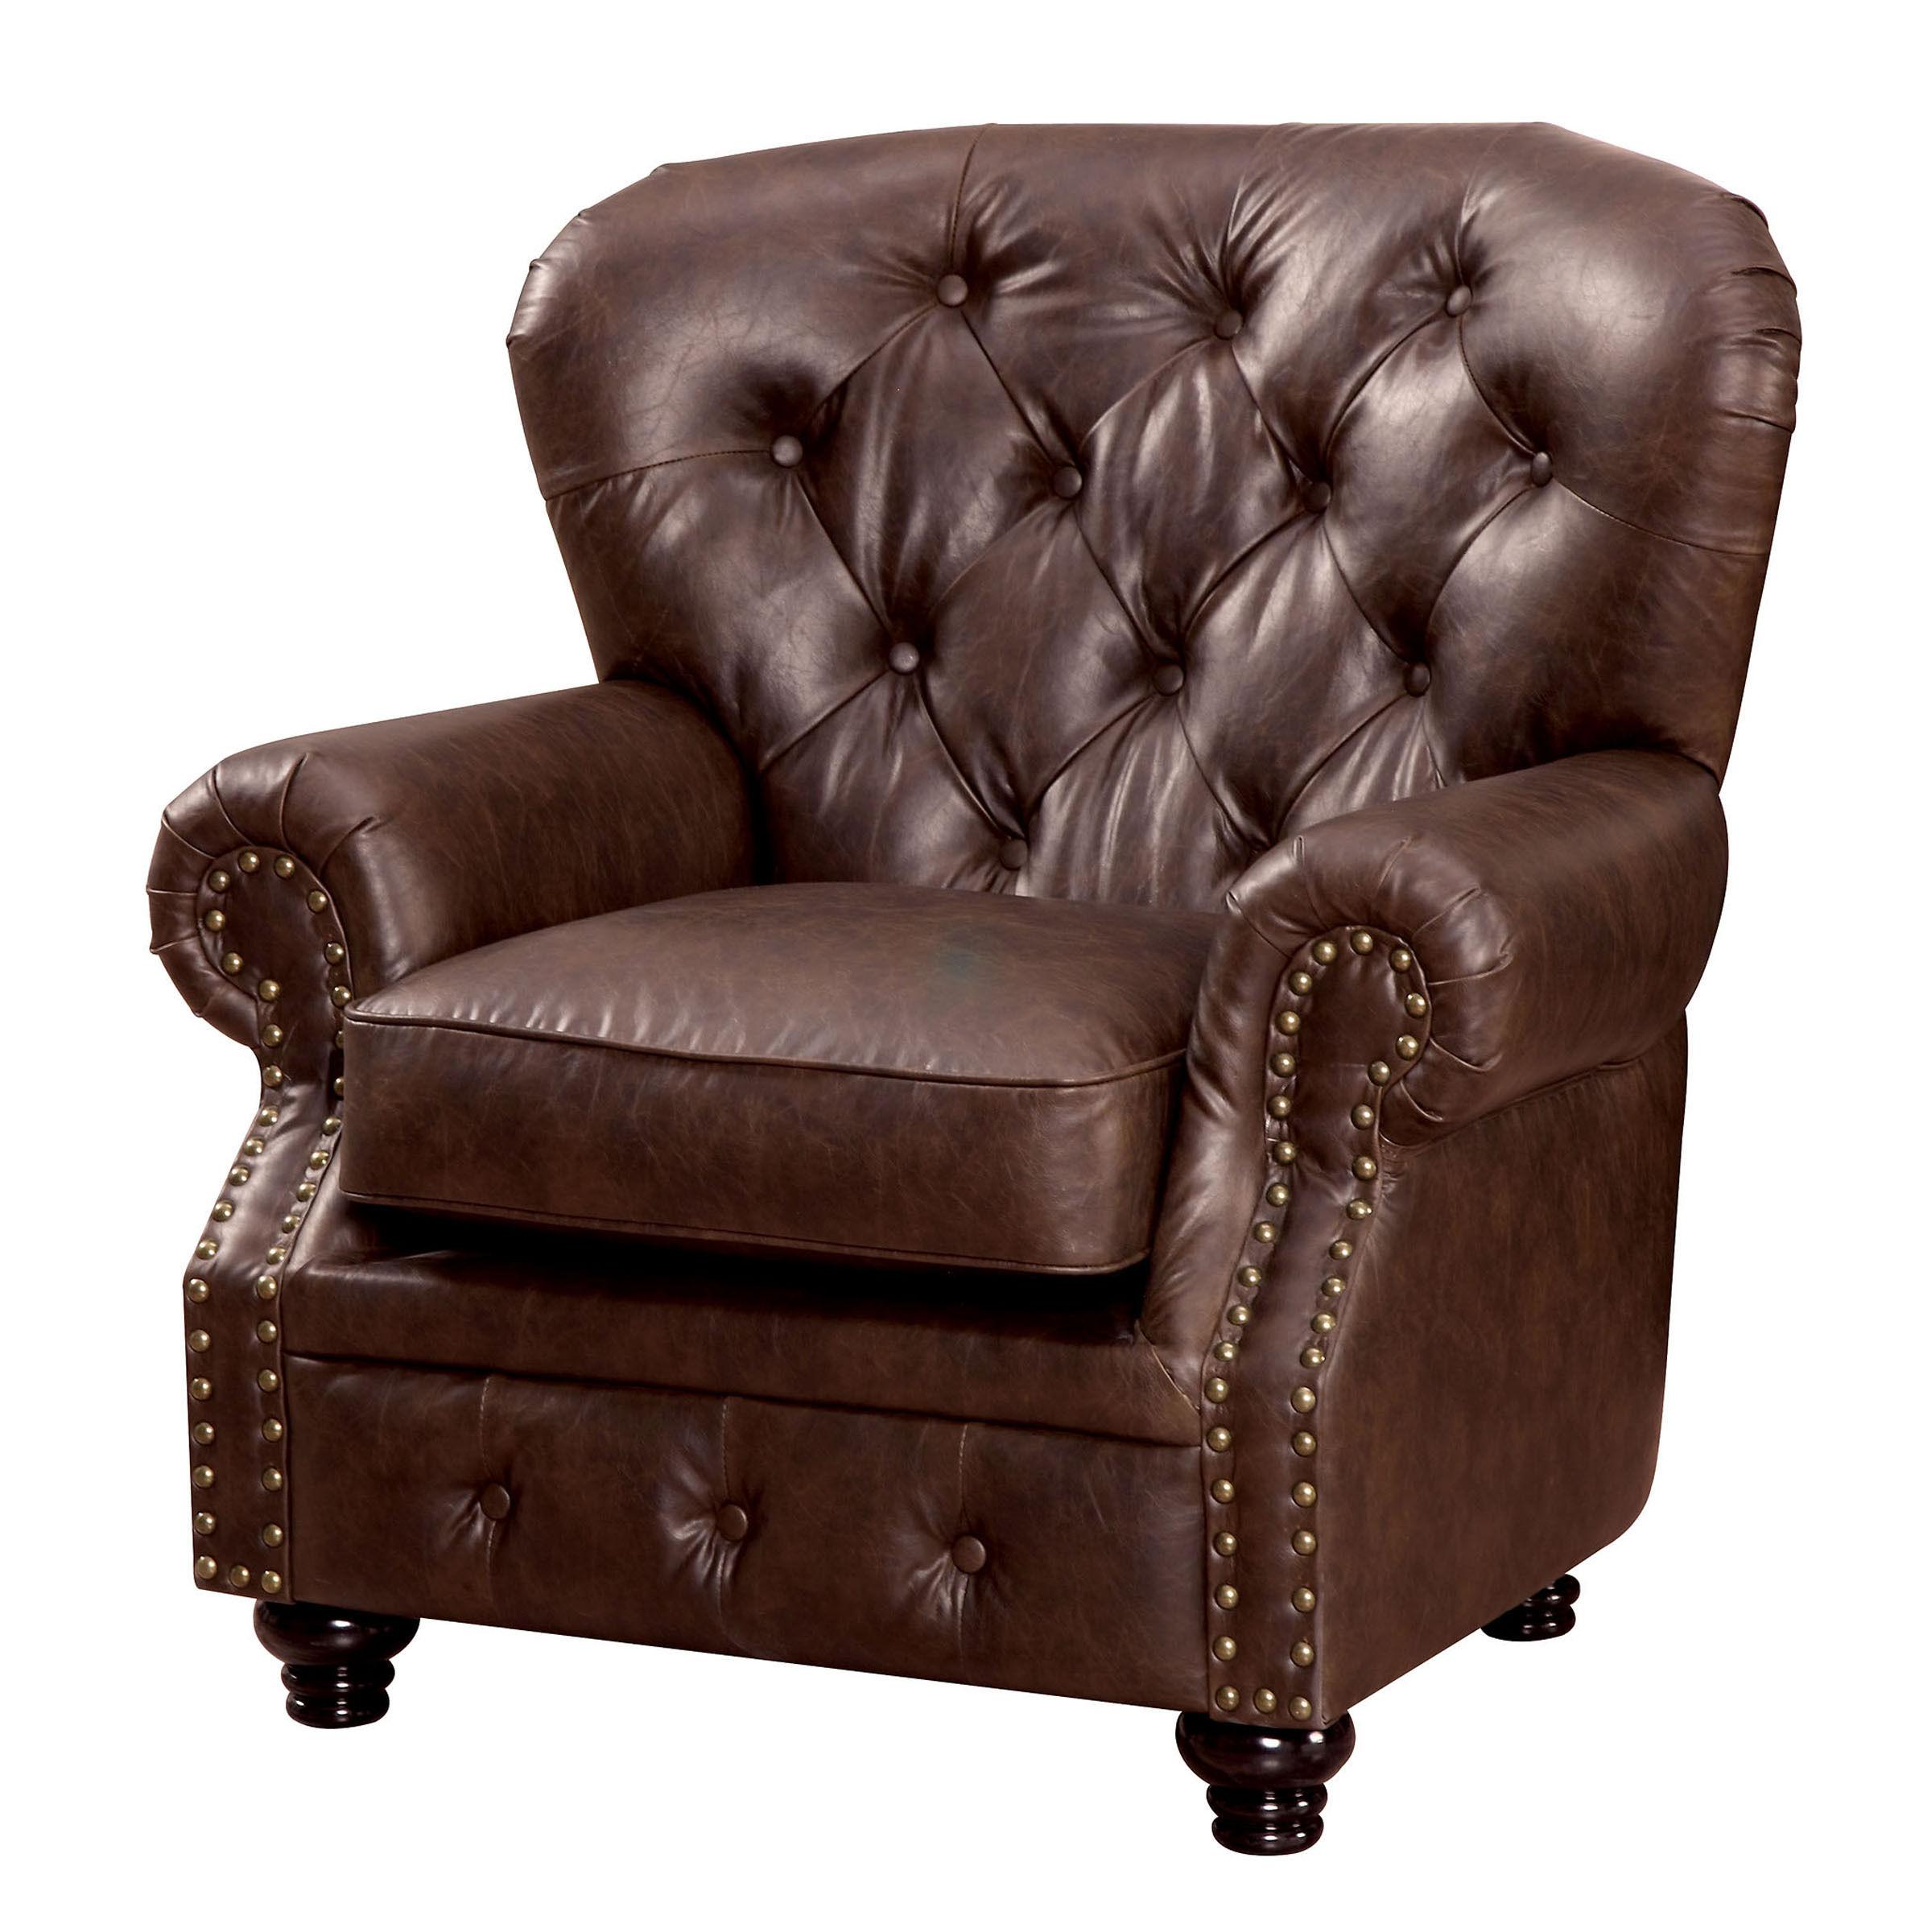 Furniture of America CM6269BR-CH Stanford Arm Chair